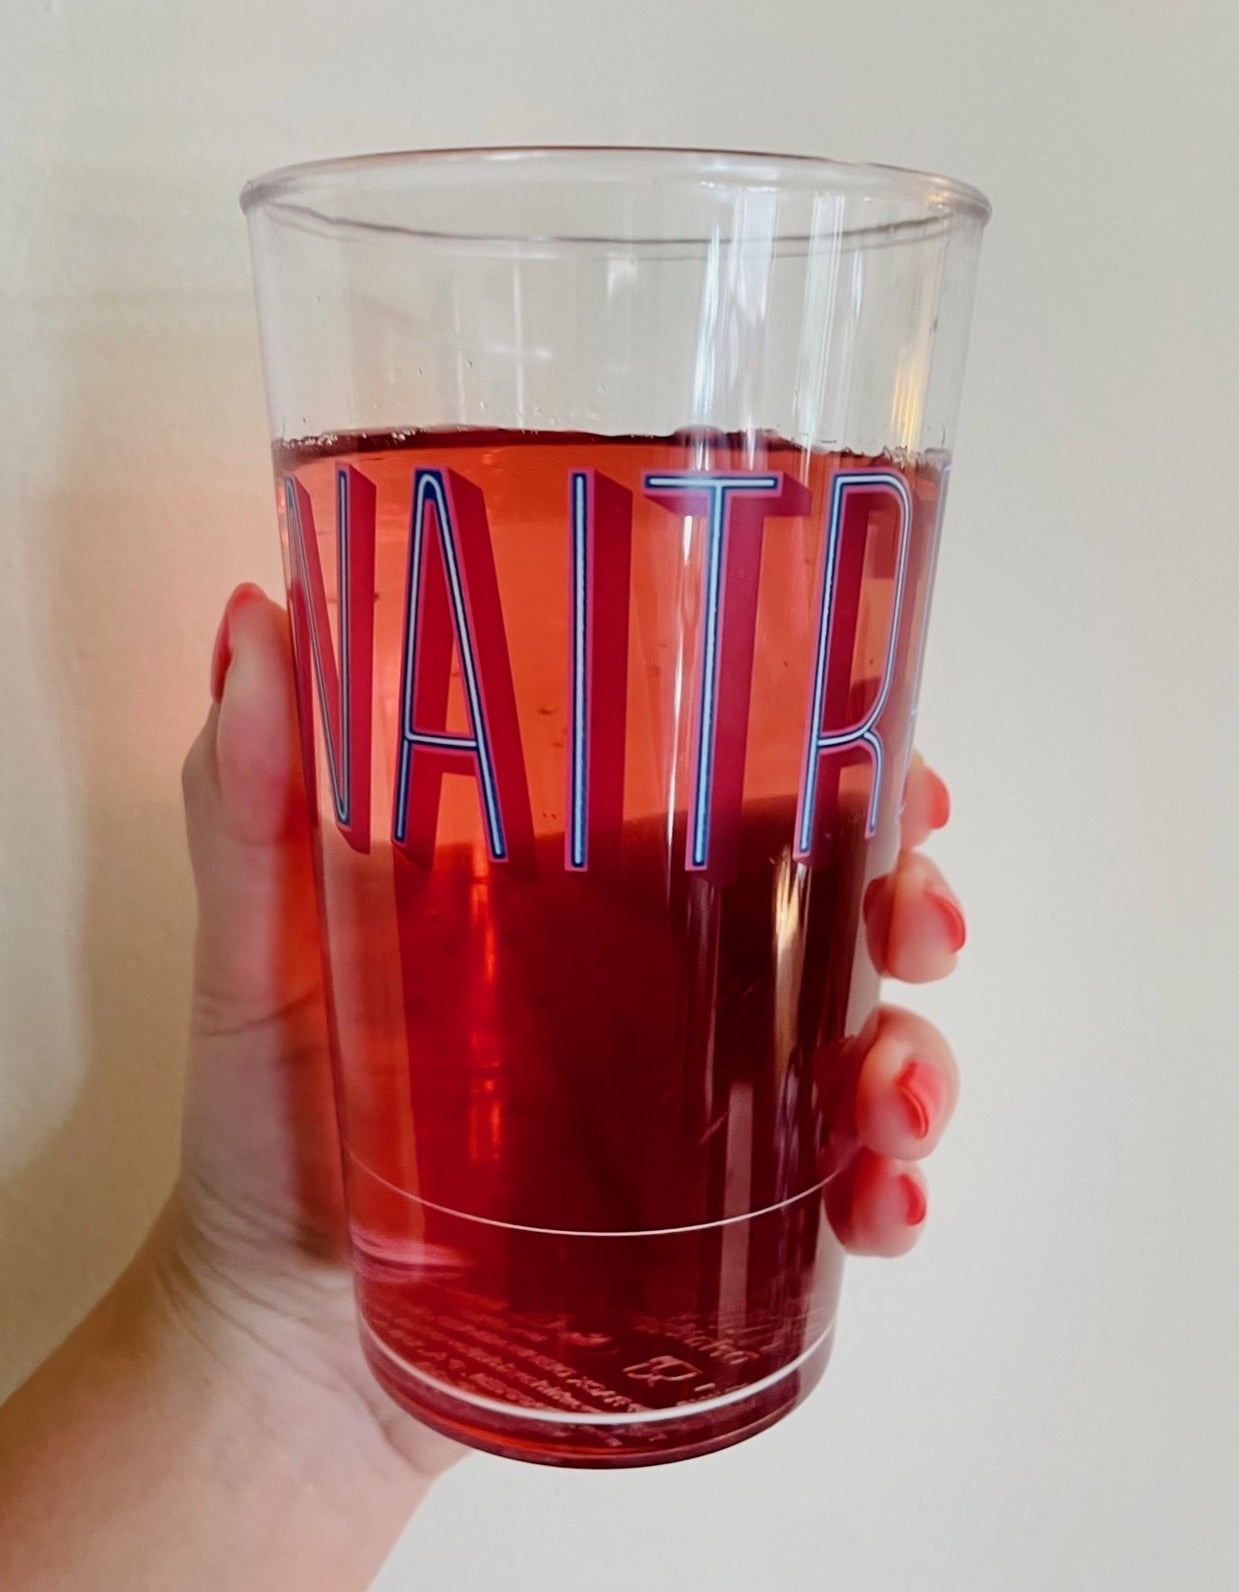 A glass of the juice beverage